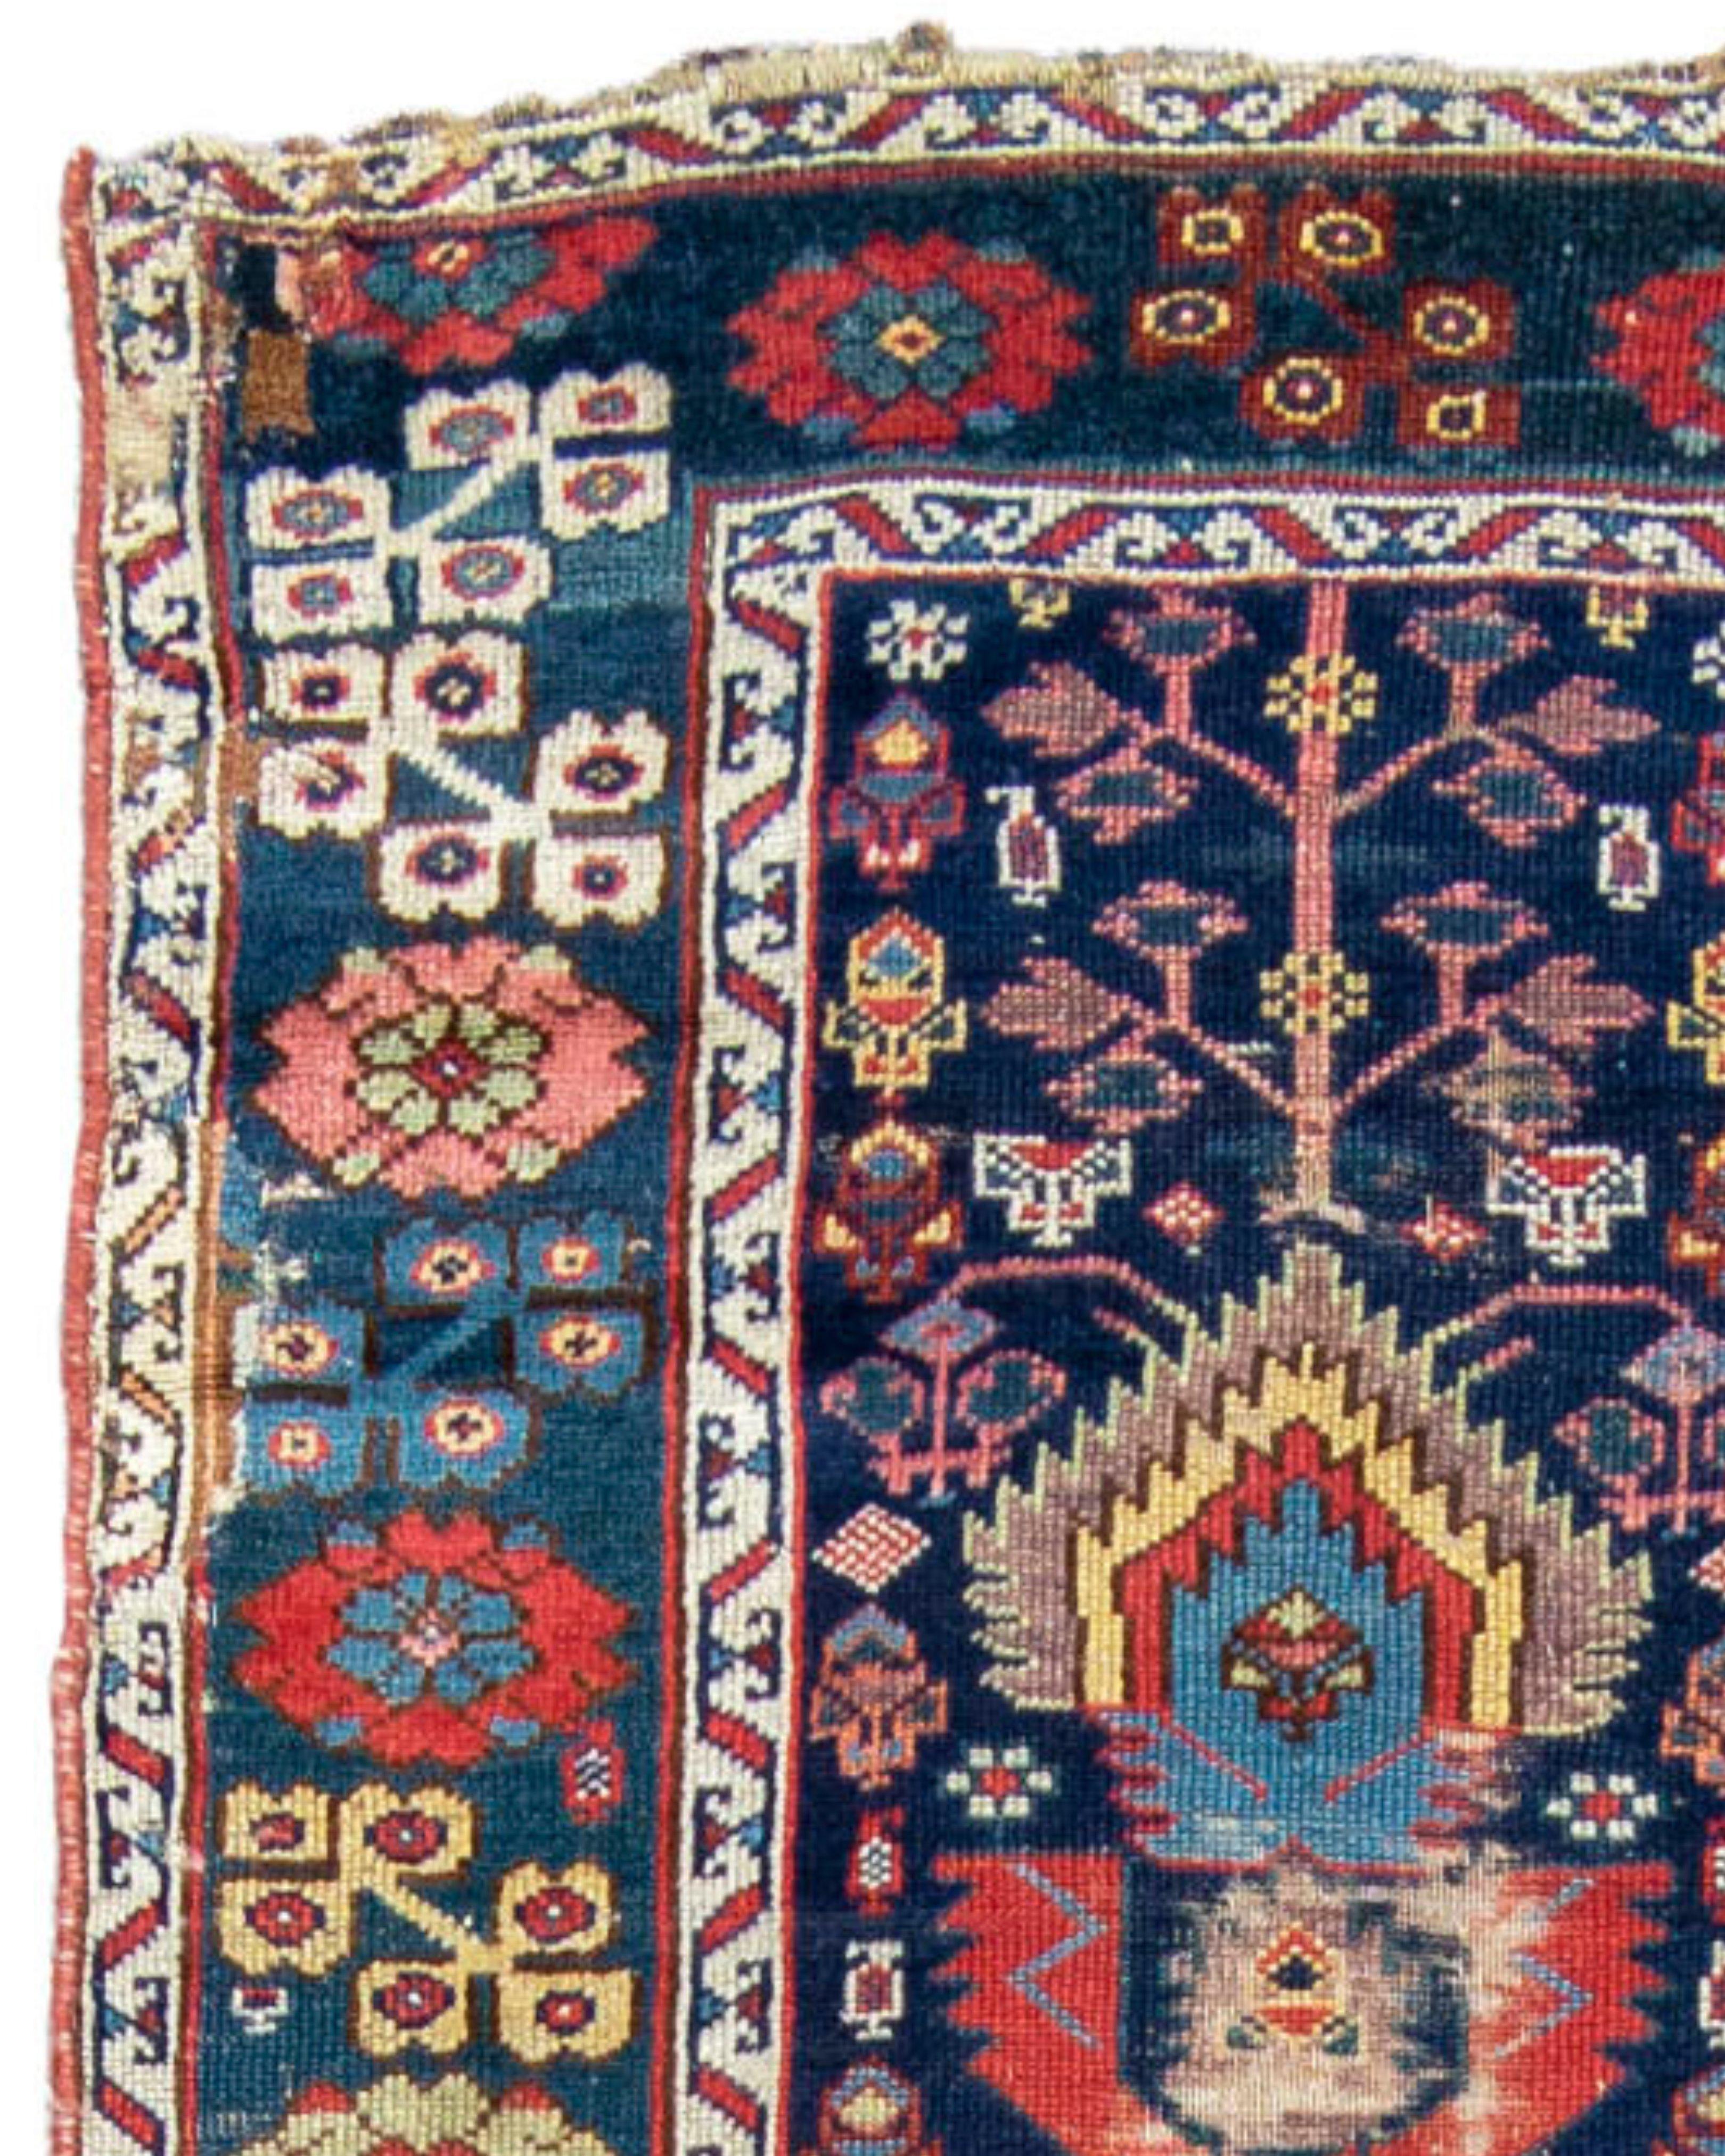 Antique Northwest Persian Runner Rug, 19th Century

Additional information:
Dimensions: 3'9